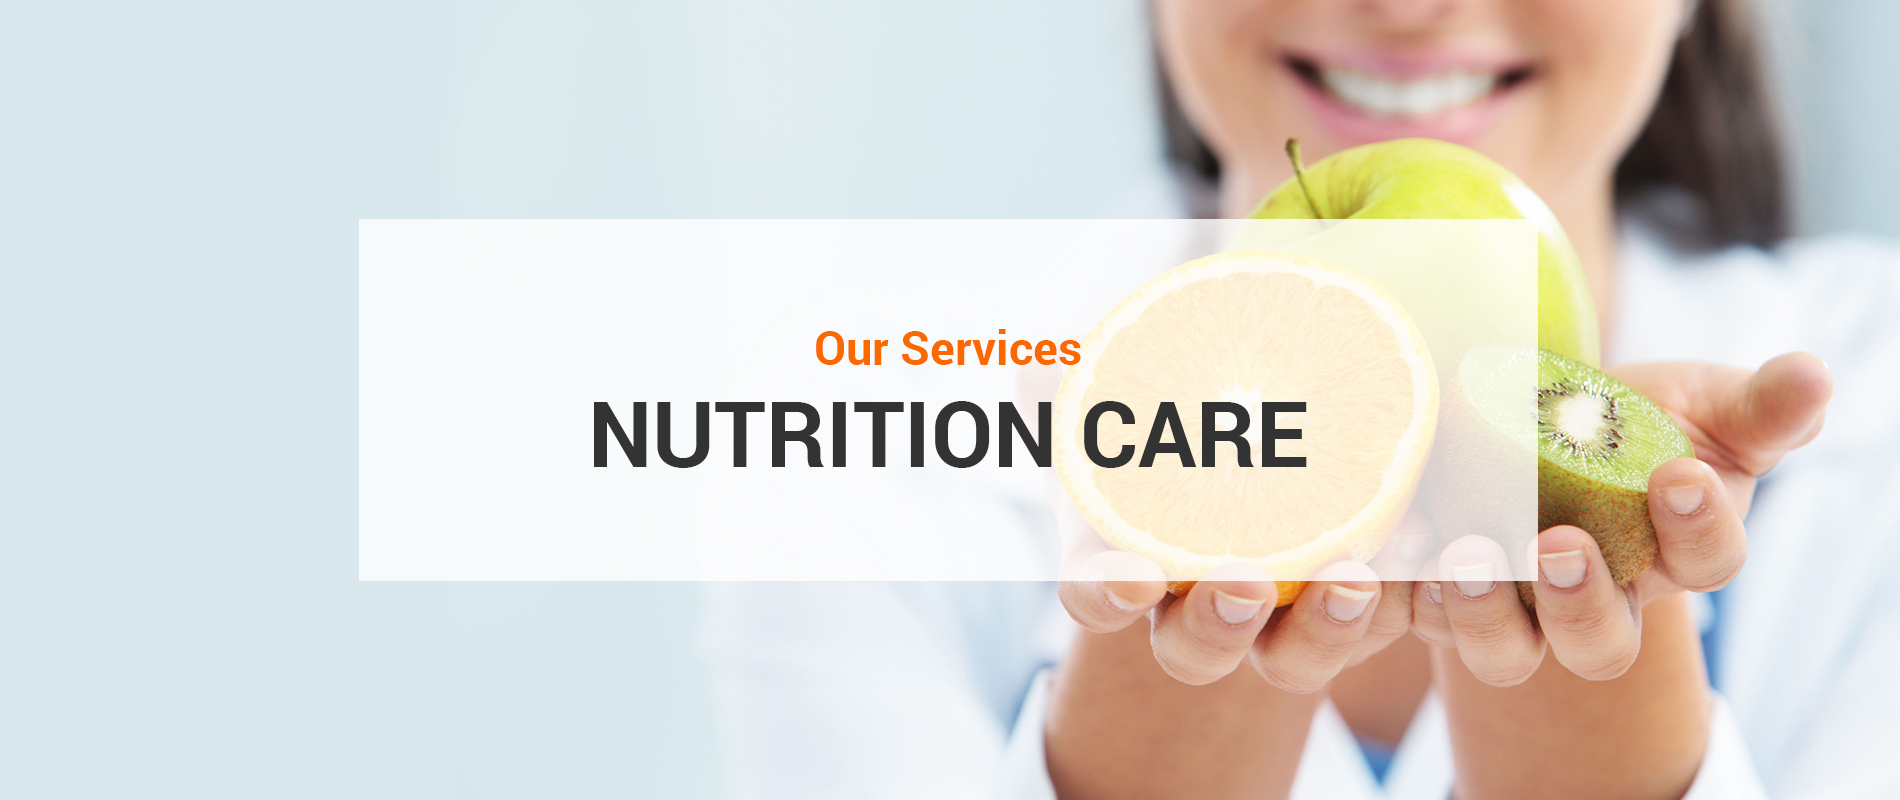 weight loss nutrition care in malaysia